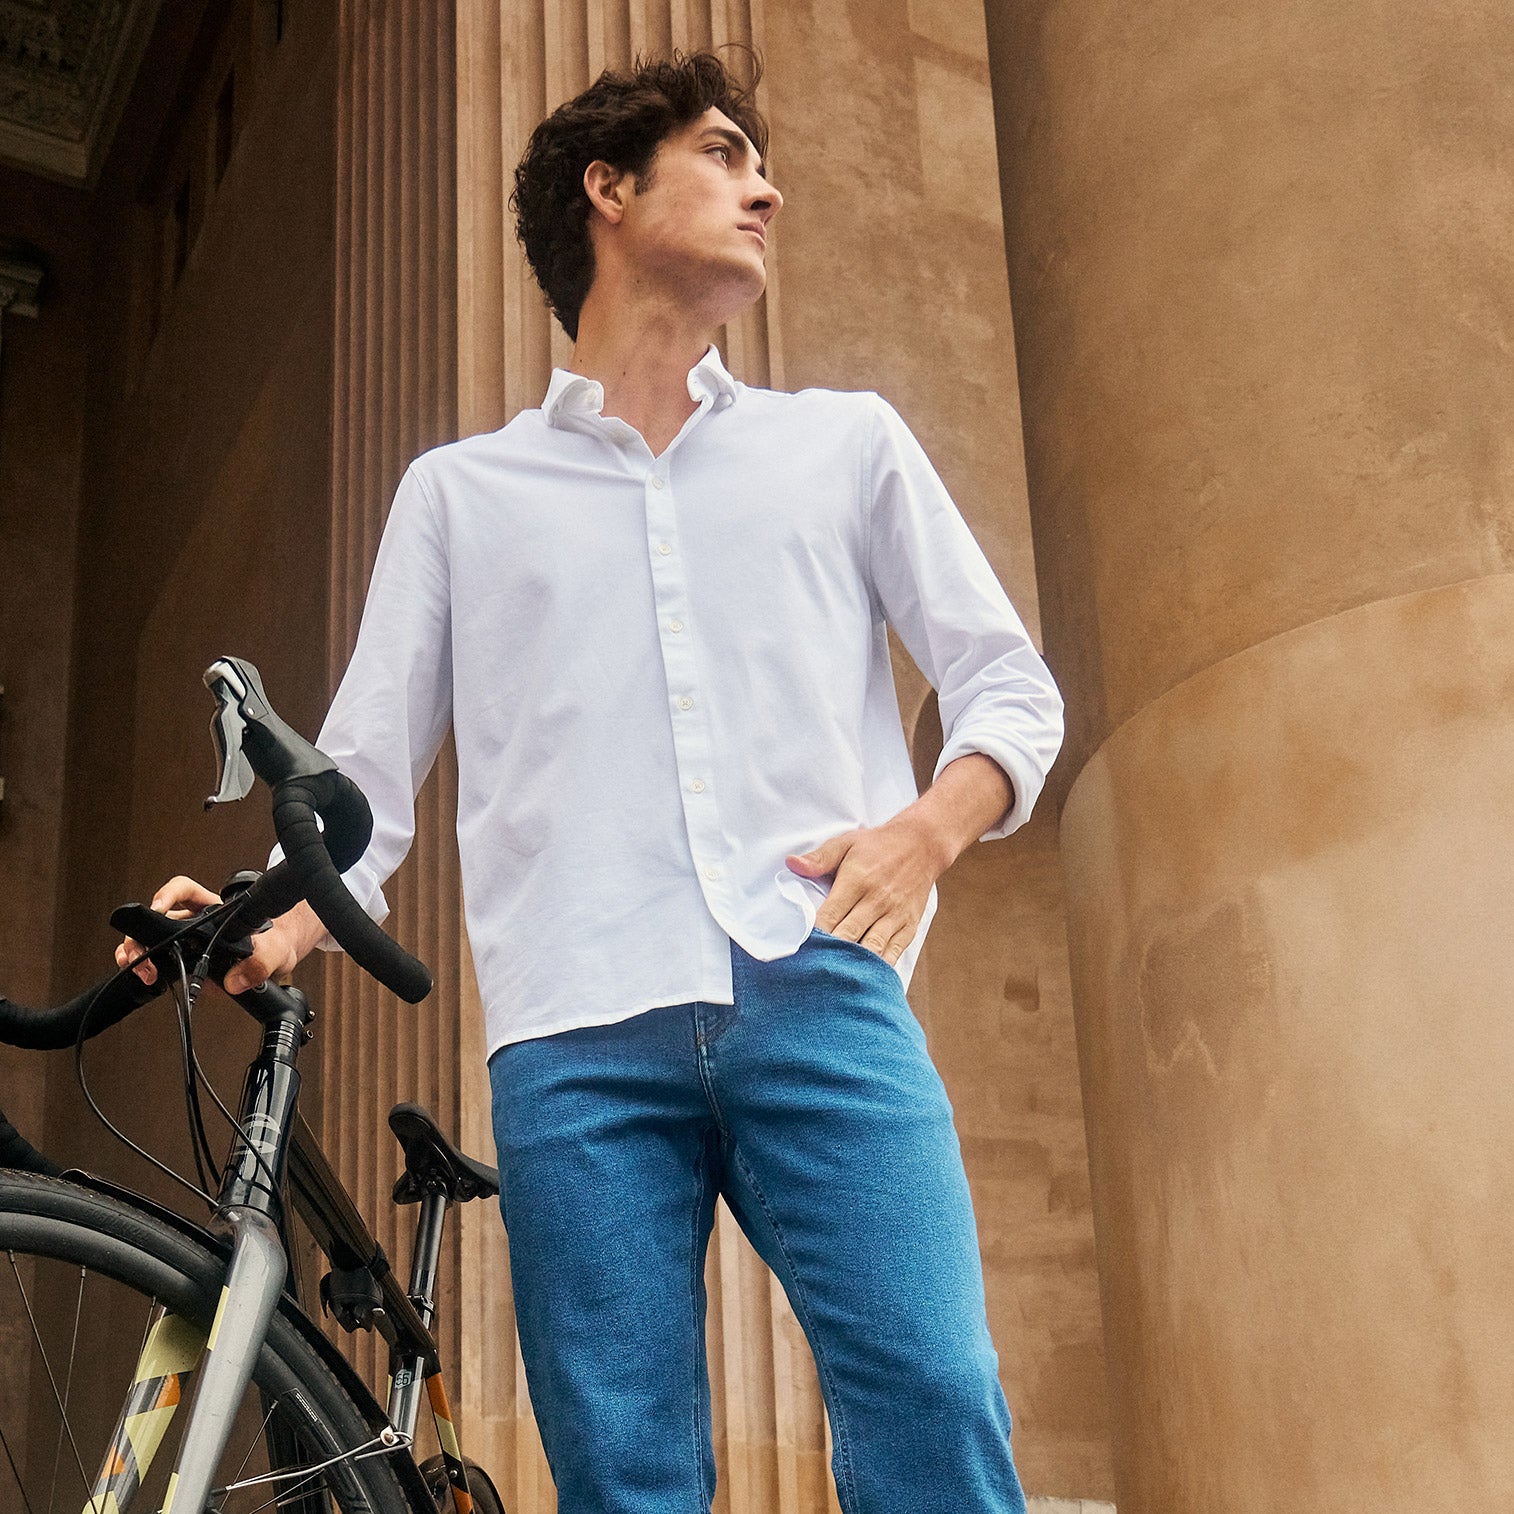 Man wearing white shirt and light blue jeans standing in front of an urban building with a bike